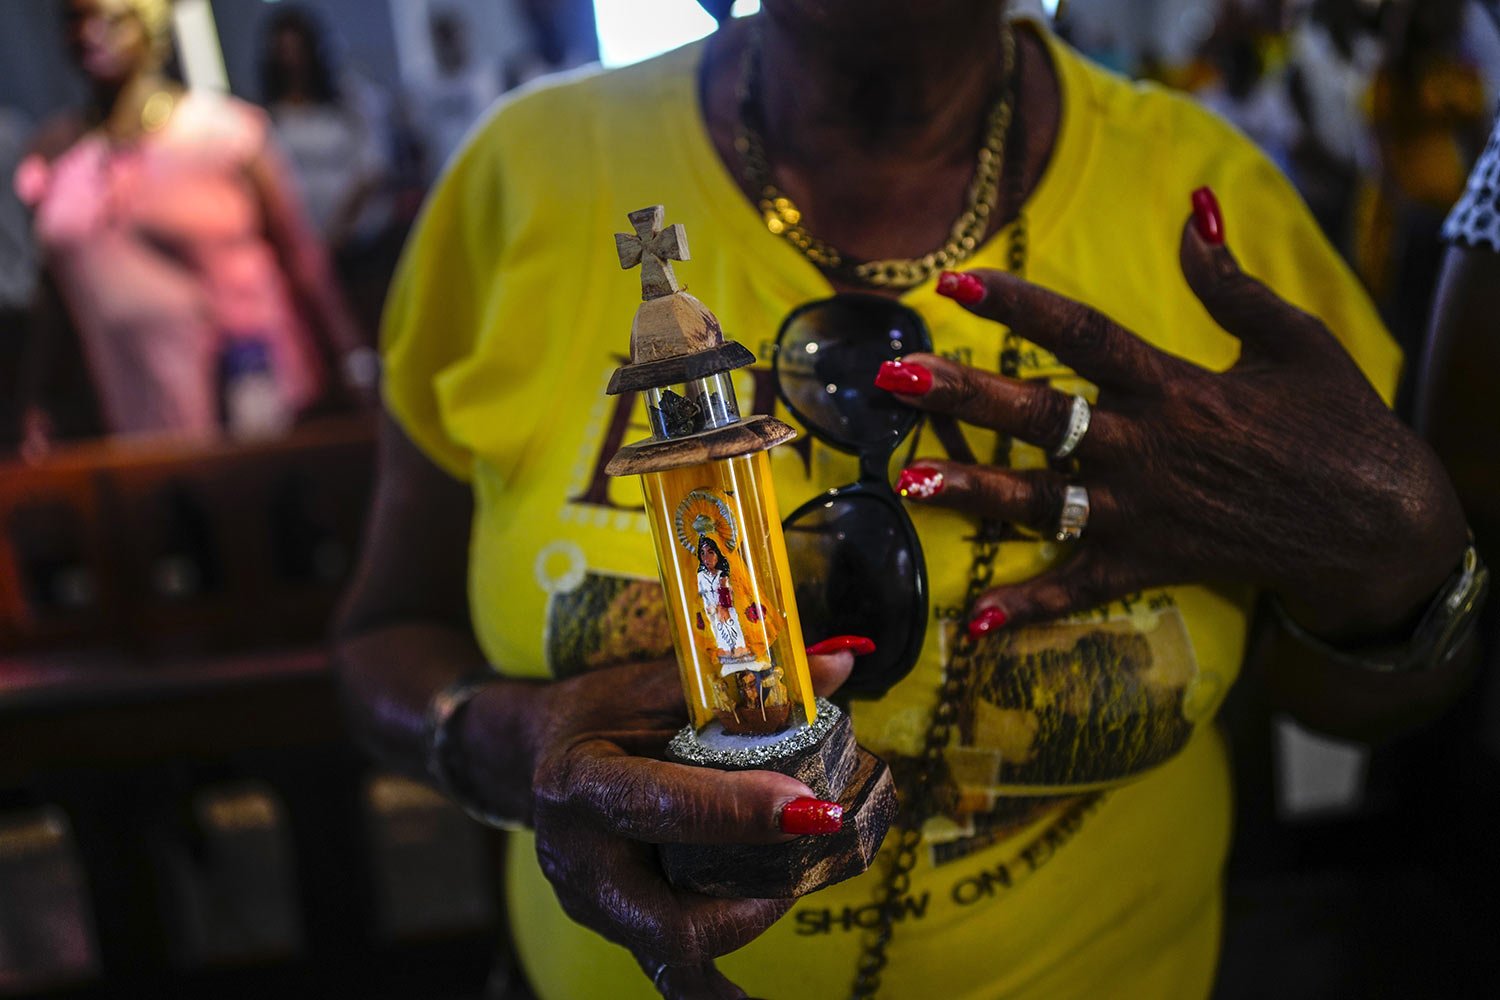  A person holds a statuette of the Virgin of Charity of Cobre during Mass at the Virgin's shrine in El Cobre, Cuba, Feb. 11, 2024. (AP Photo/Ramon Espinosa) 